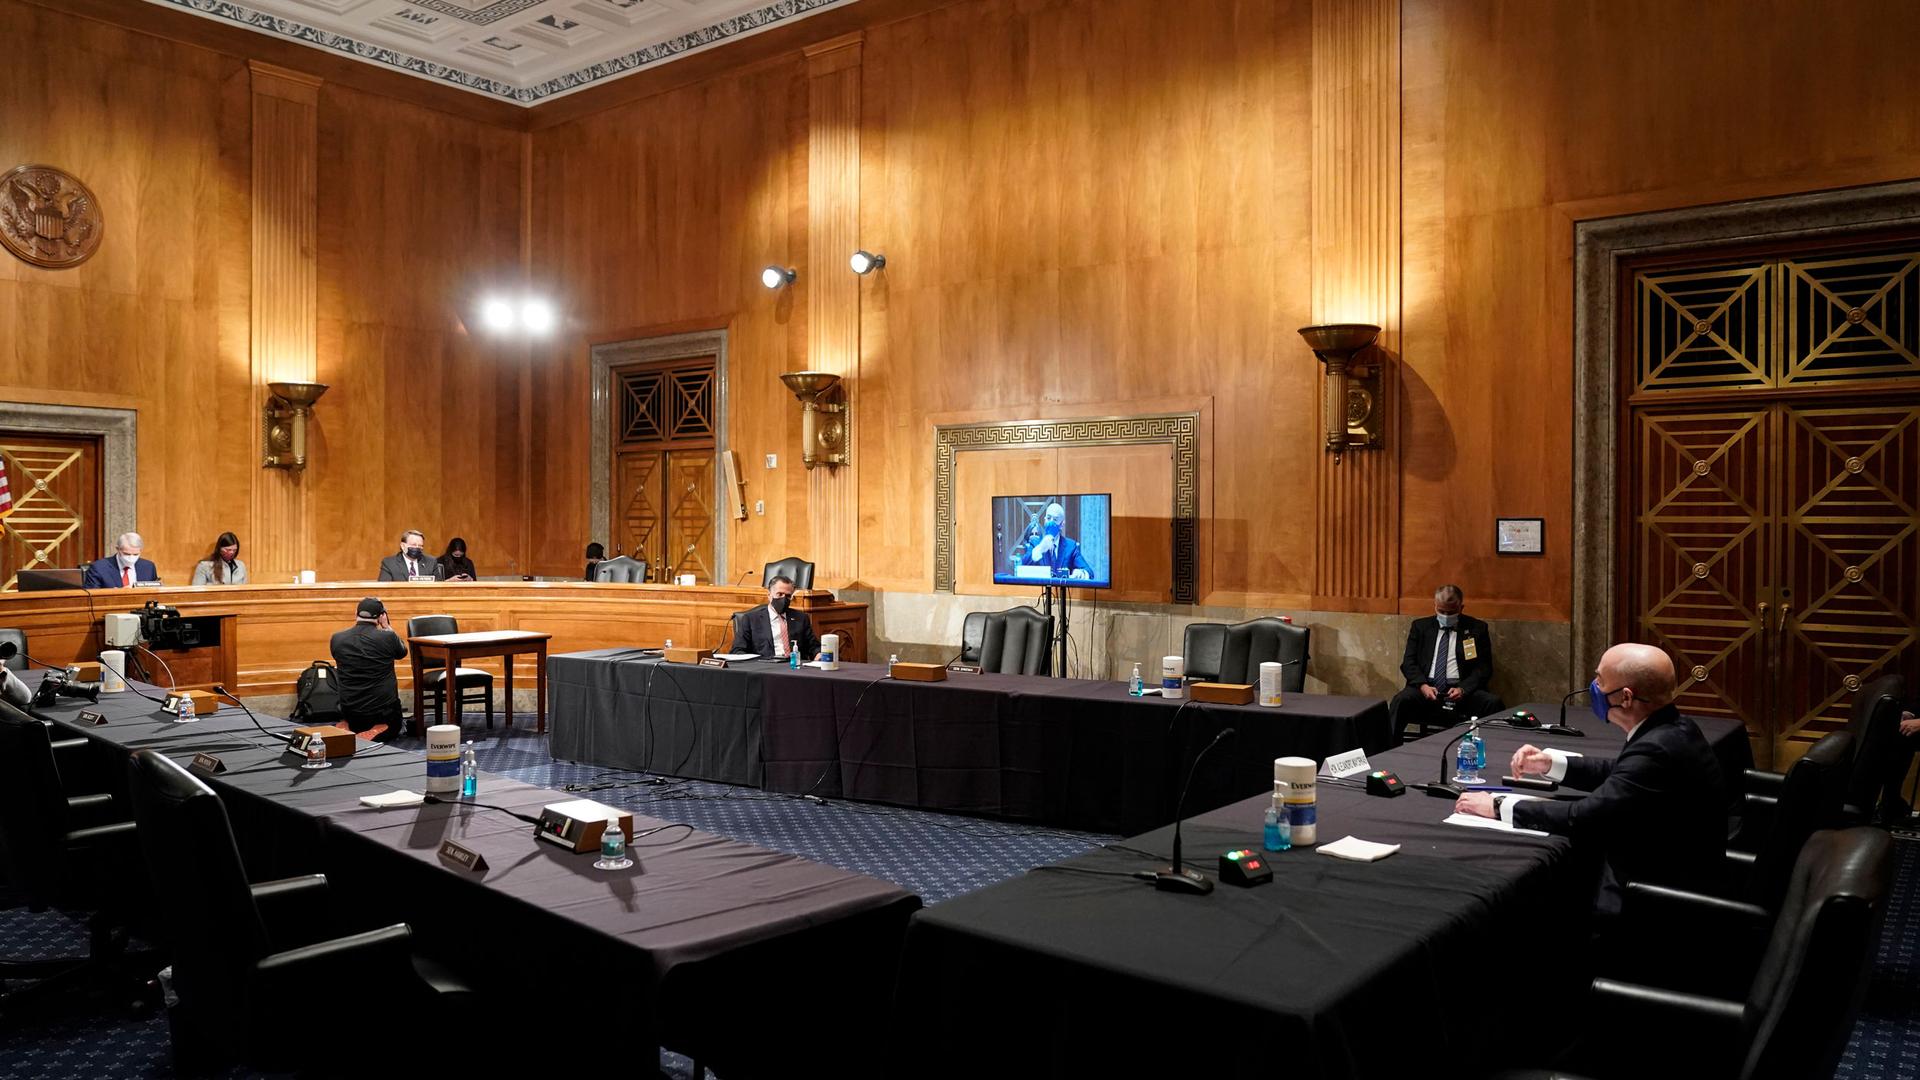 Homeland Security Secretary nominee Alejandro Mayorkas is shown seated at a long, cloth covered table in a largely empty room with tall, wooden walls.